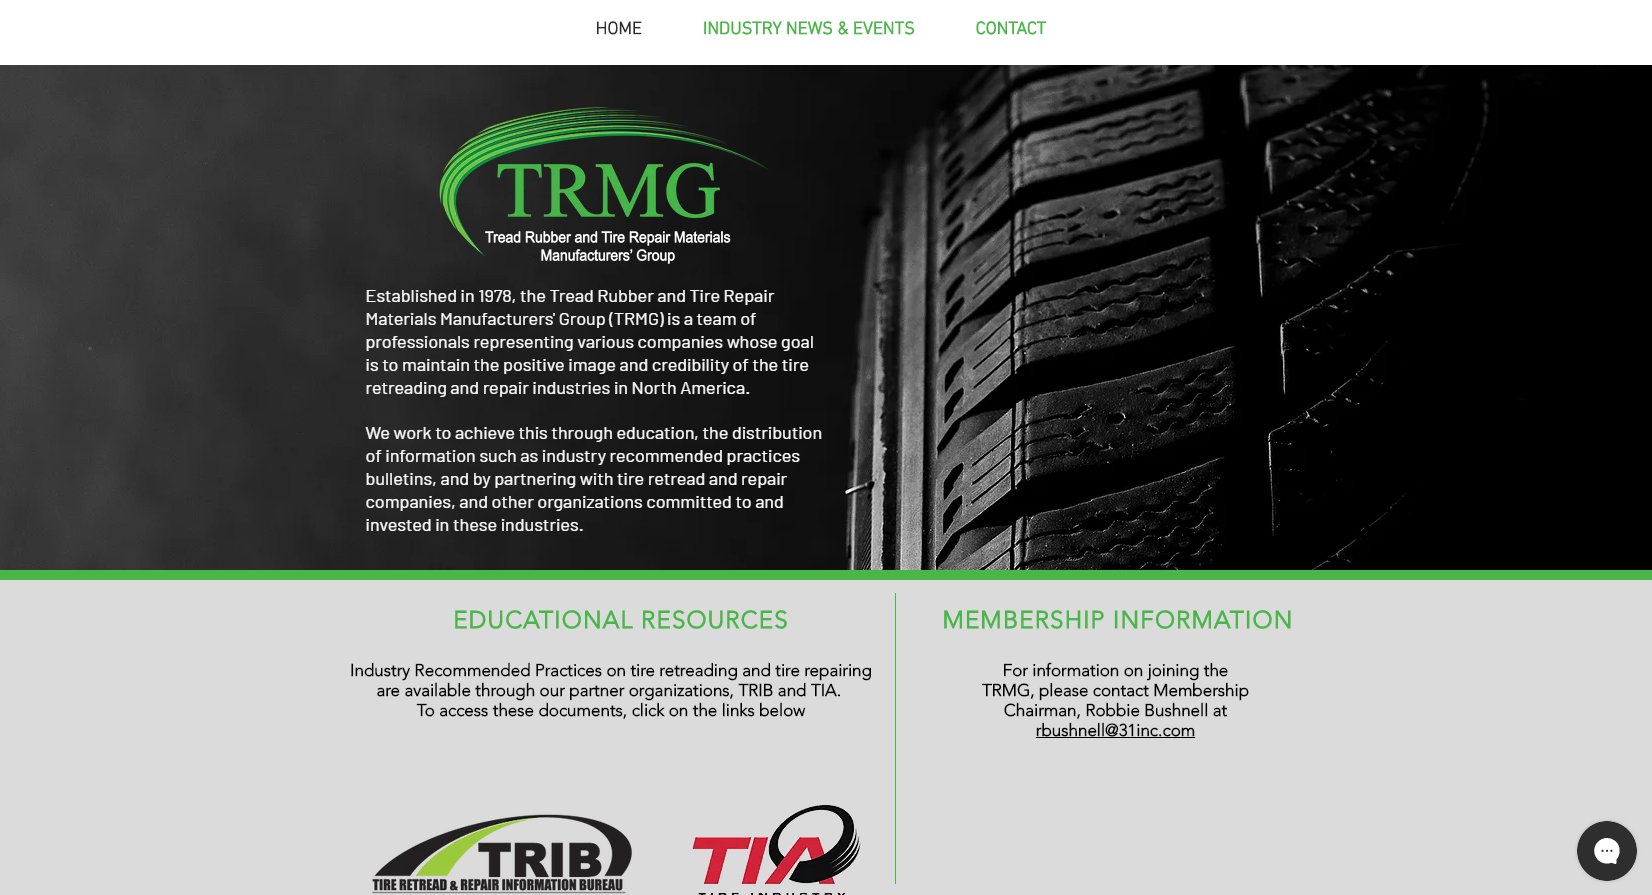 TRMG launches new website